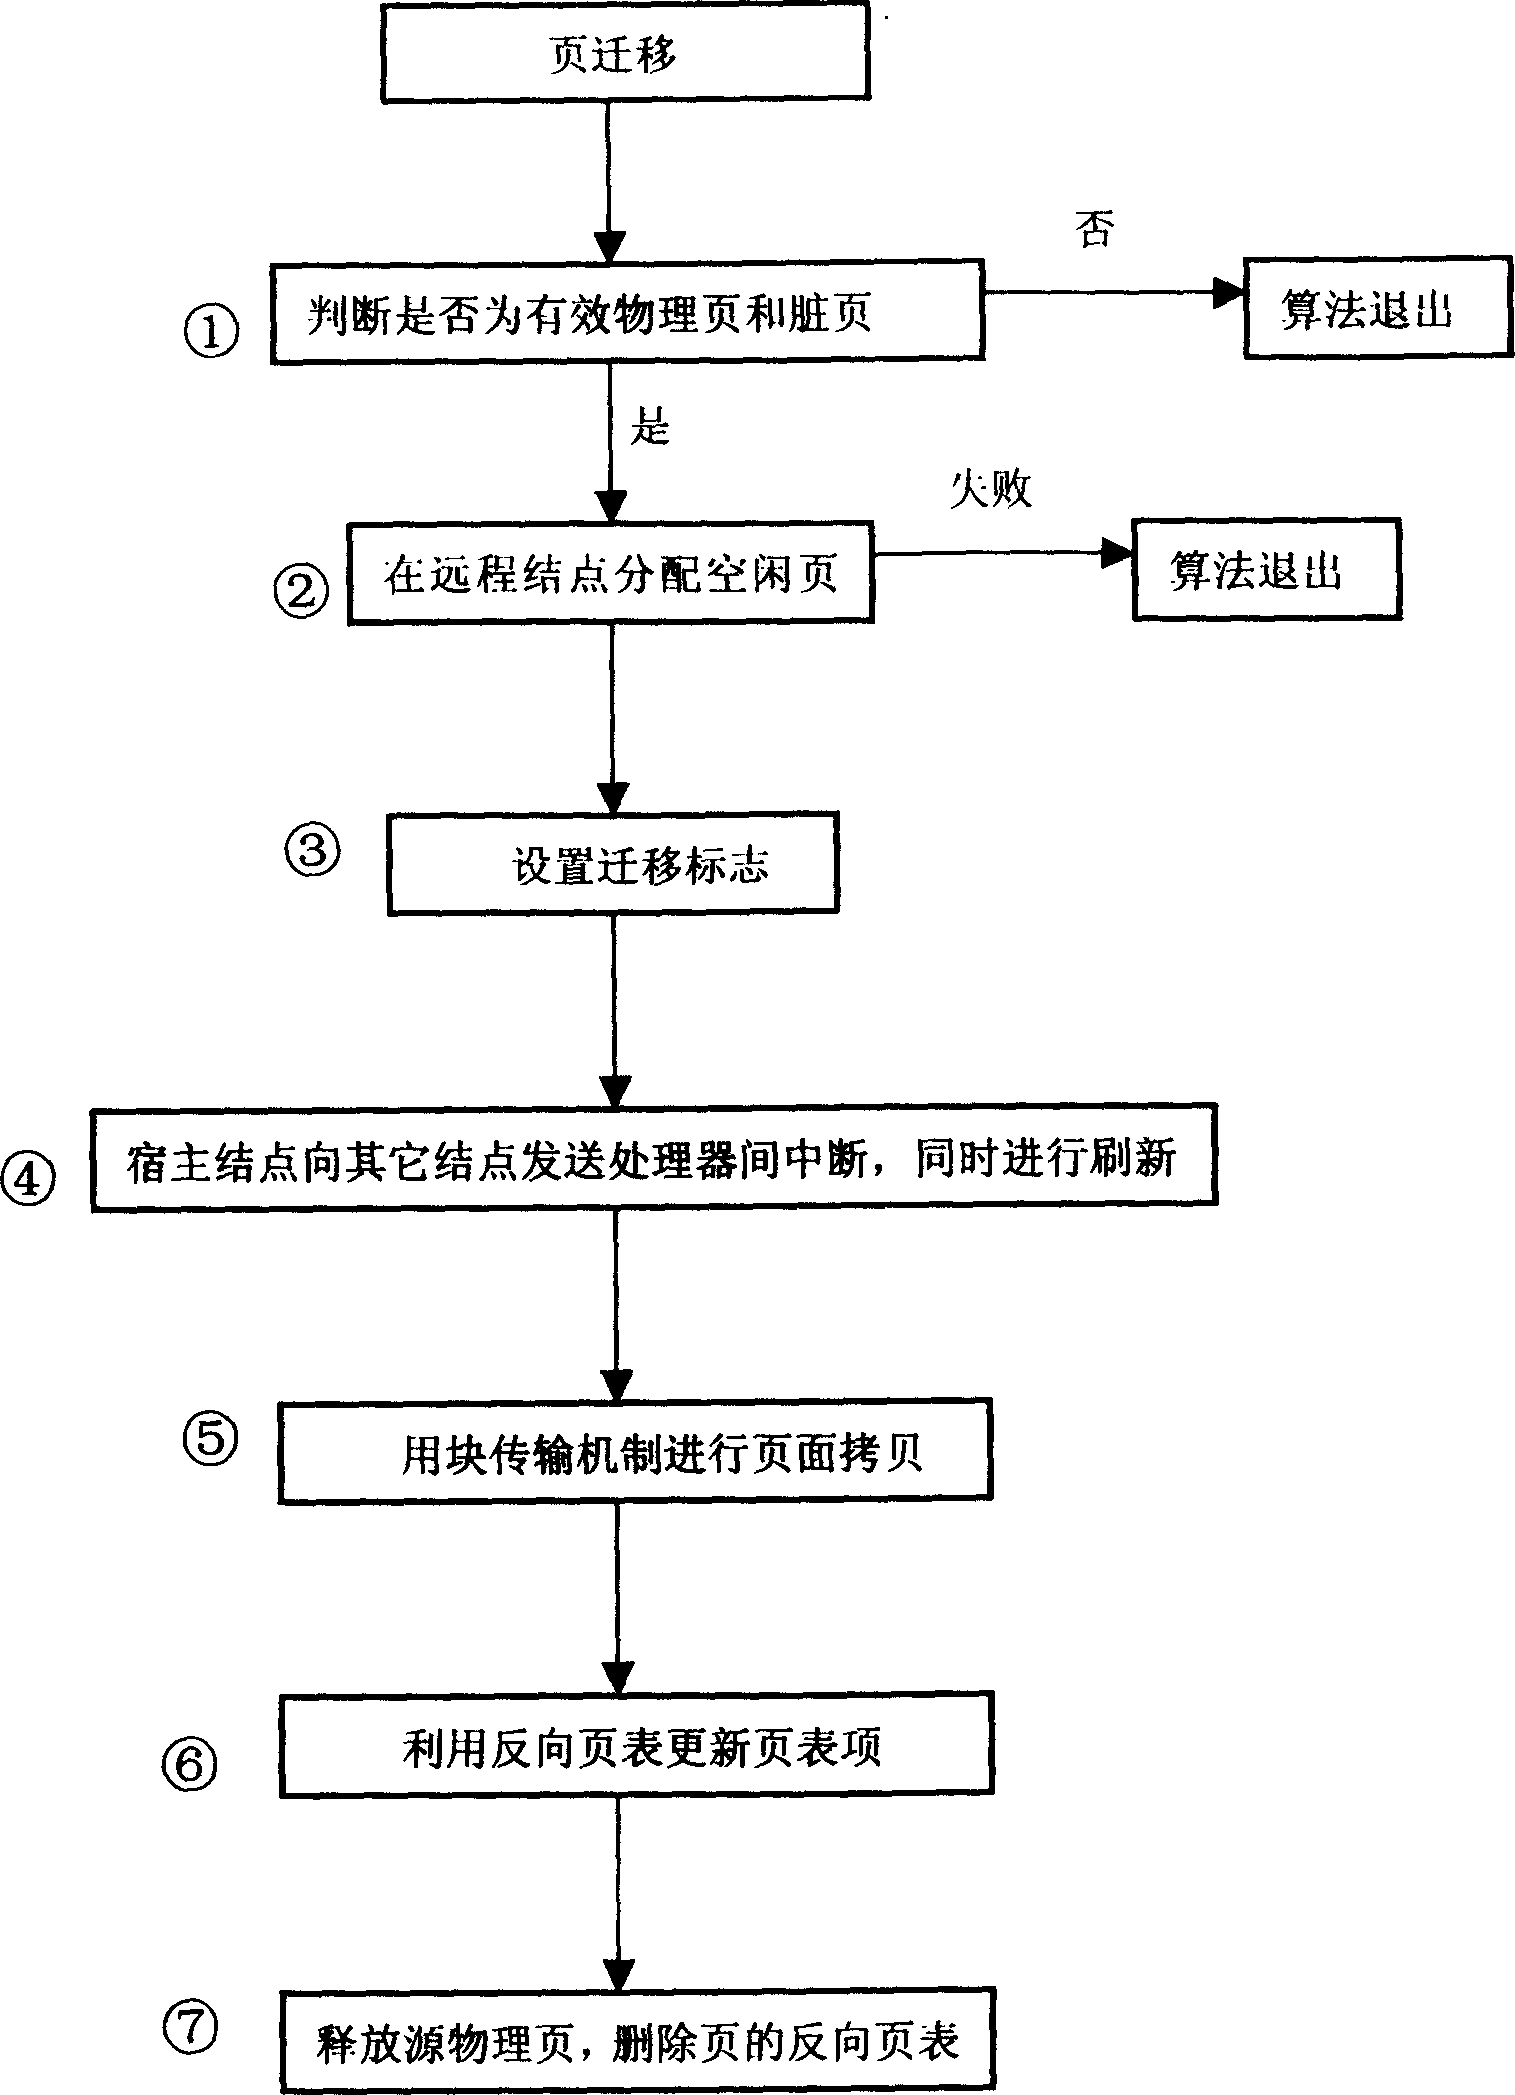 Page transport and copy method based on operation system reverse page table